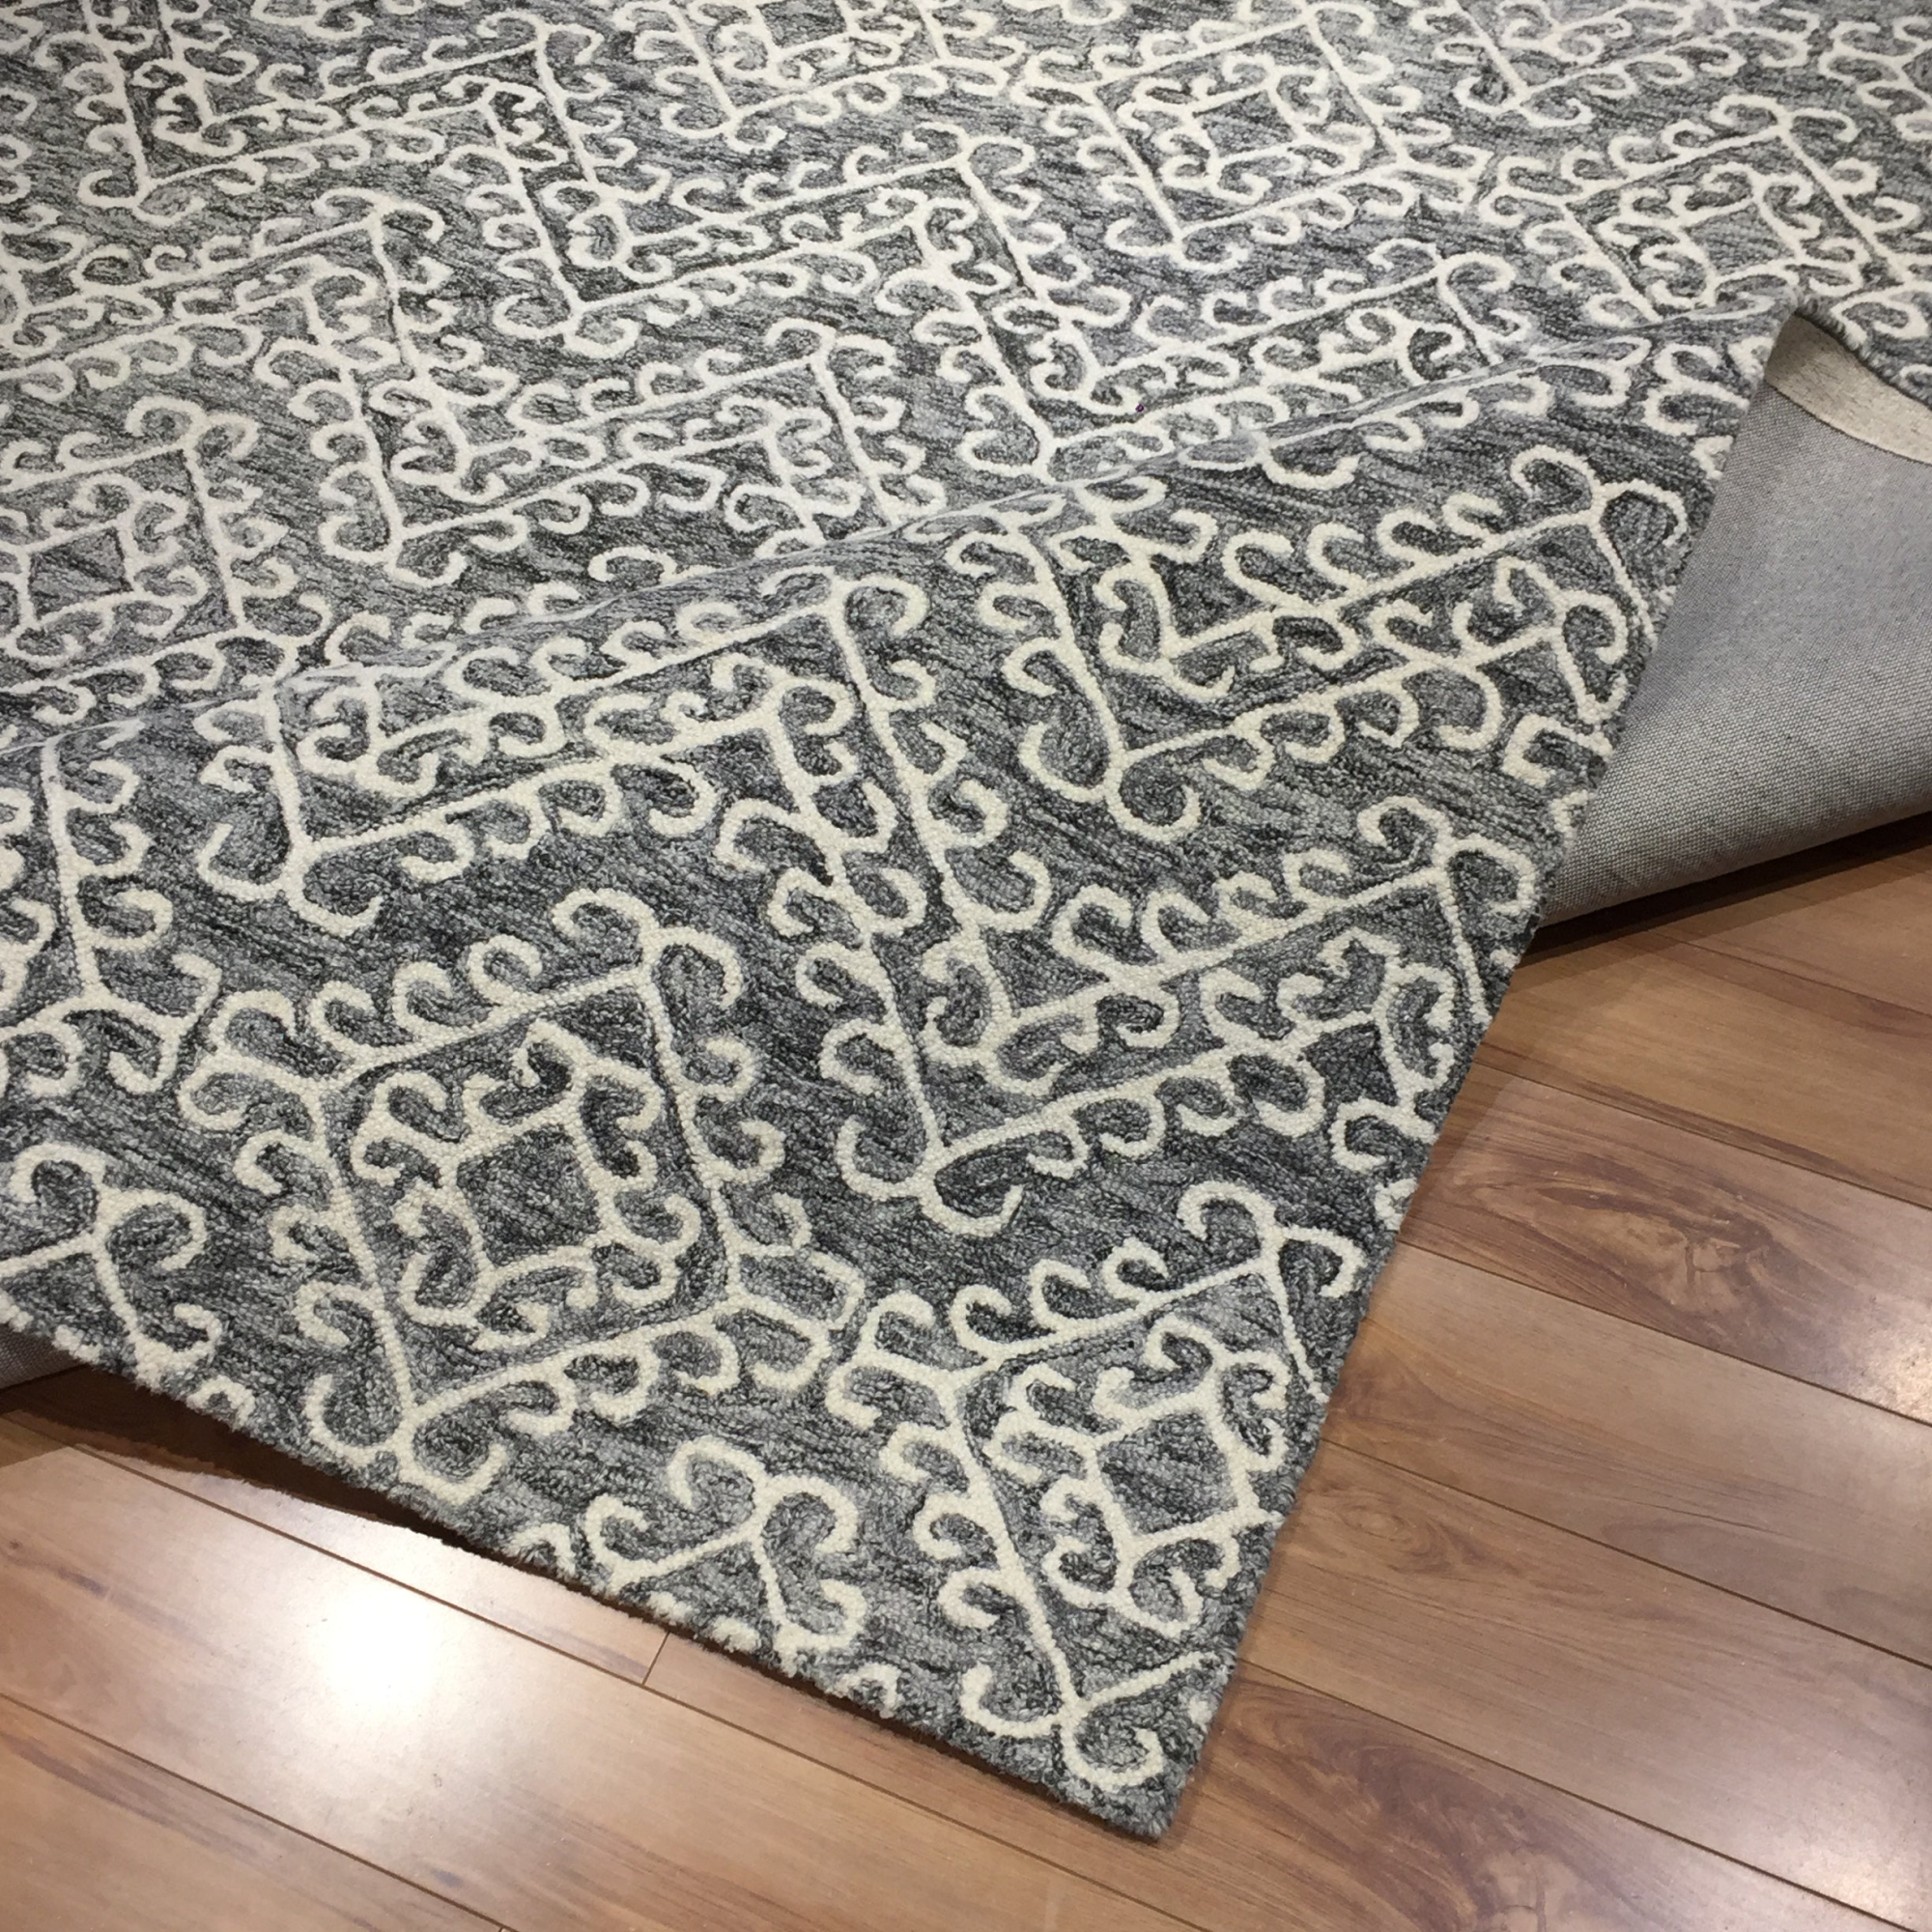 Victoria Loop Hooked Style Hand Tufted Rug-Area rug for living room, dining area, and bedroom